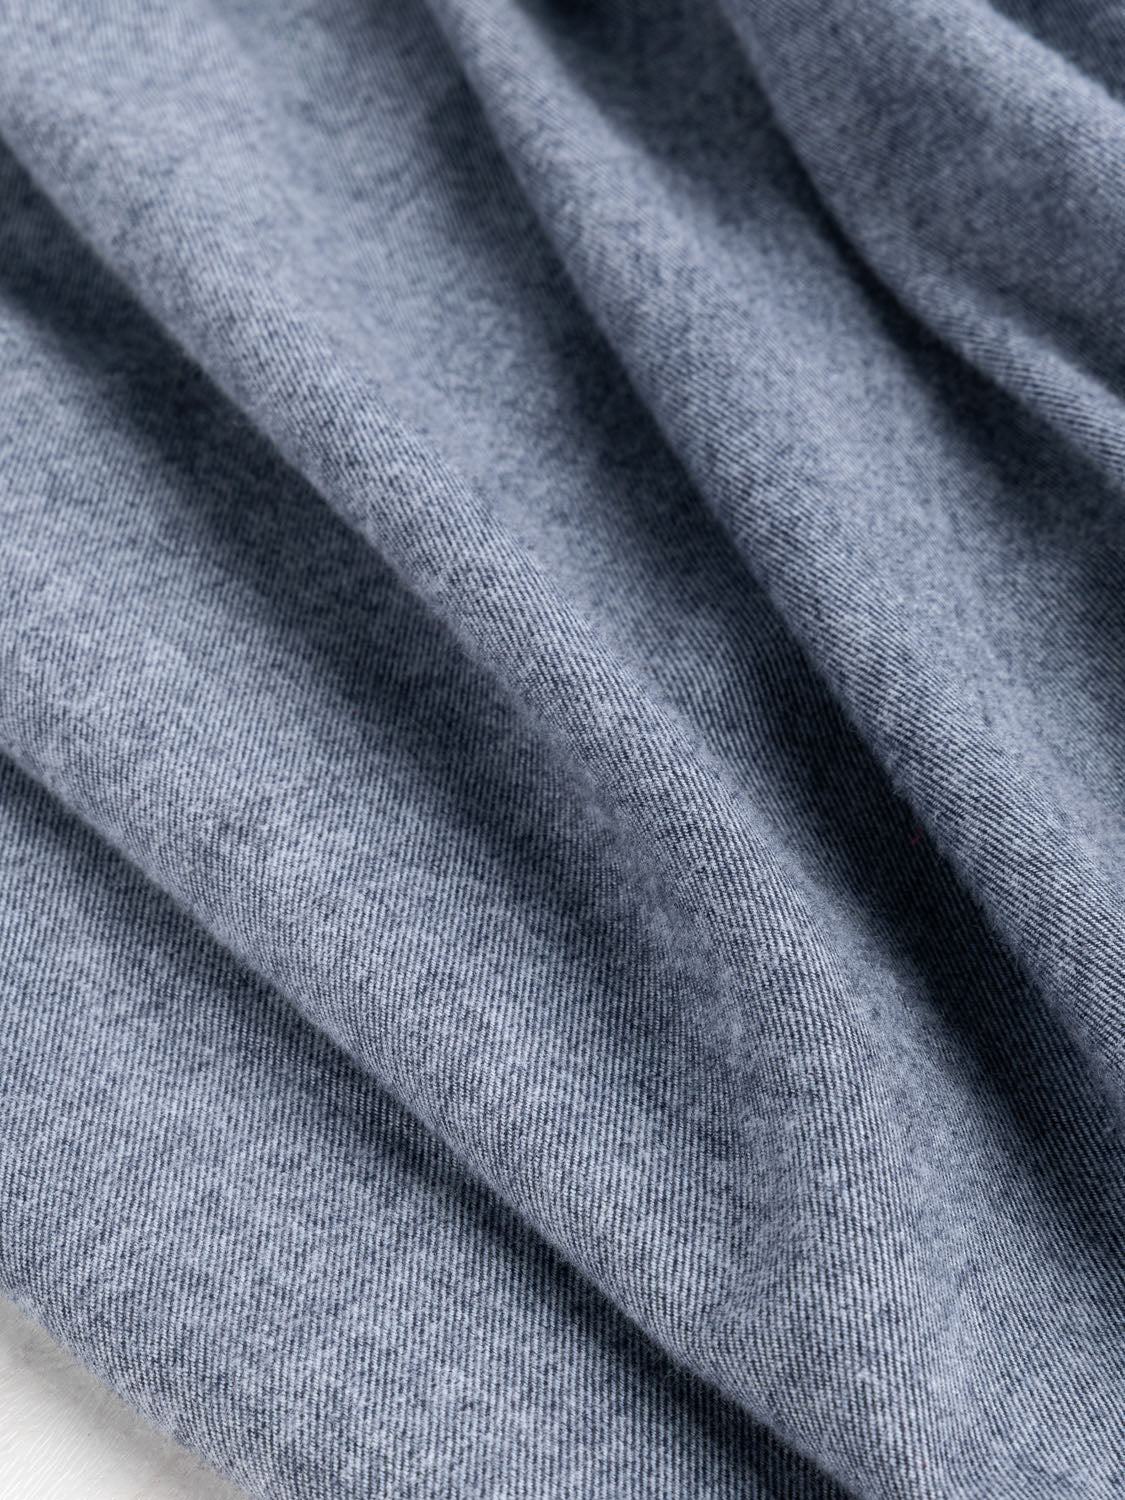 Solid Jersey Knit Fabric